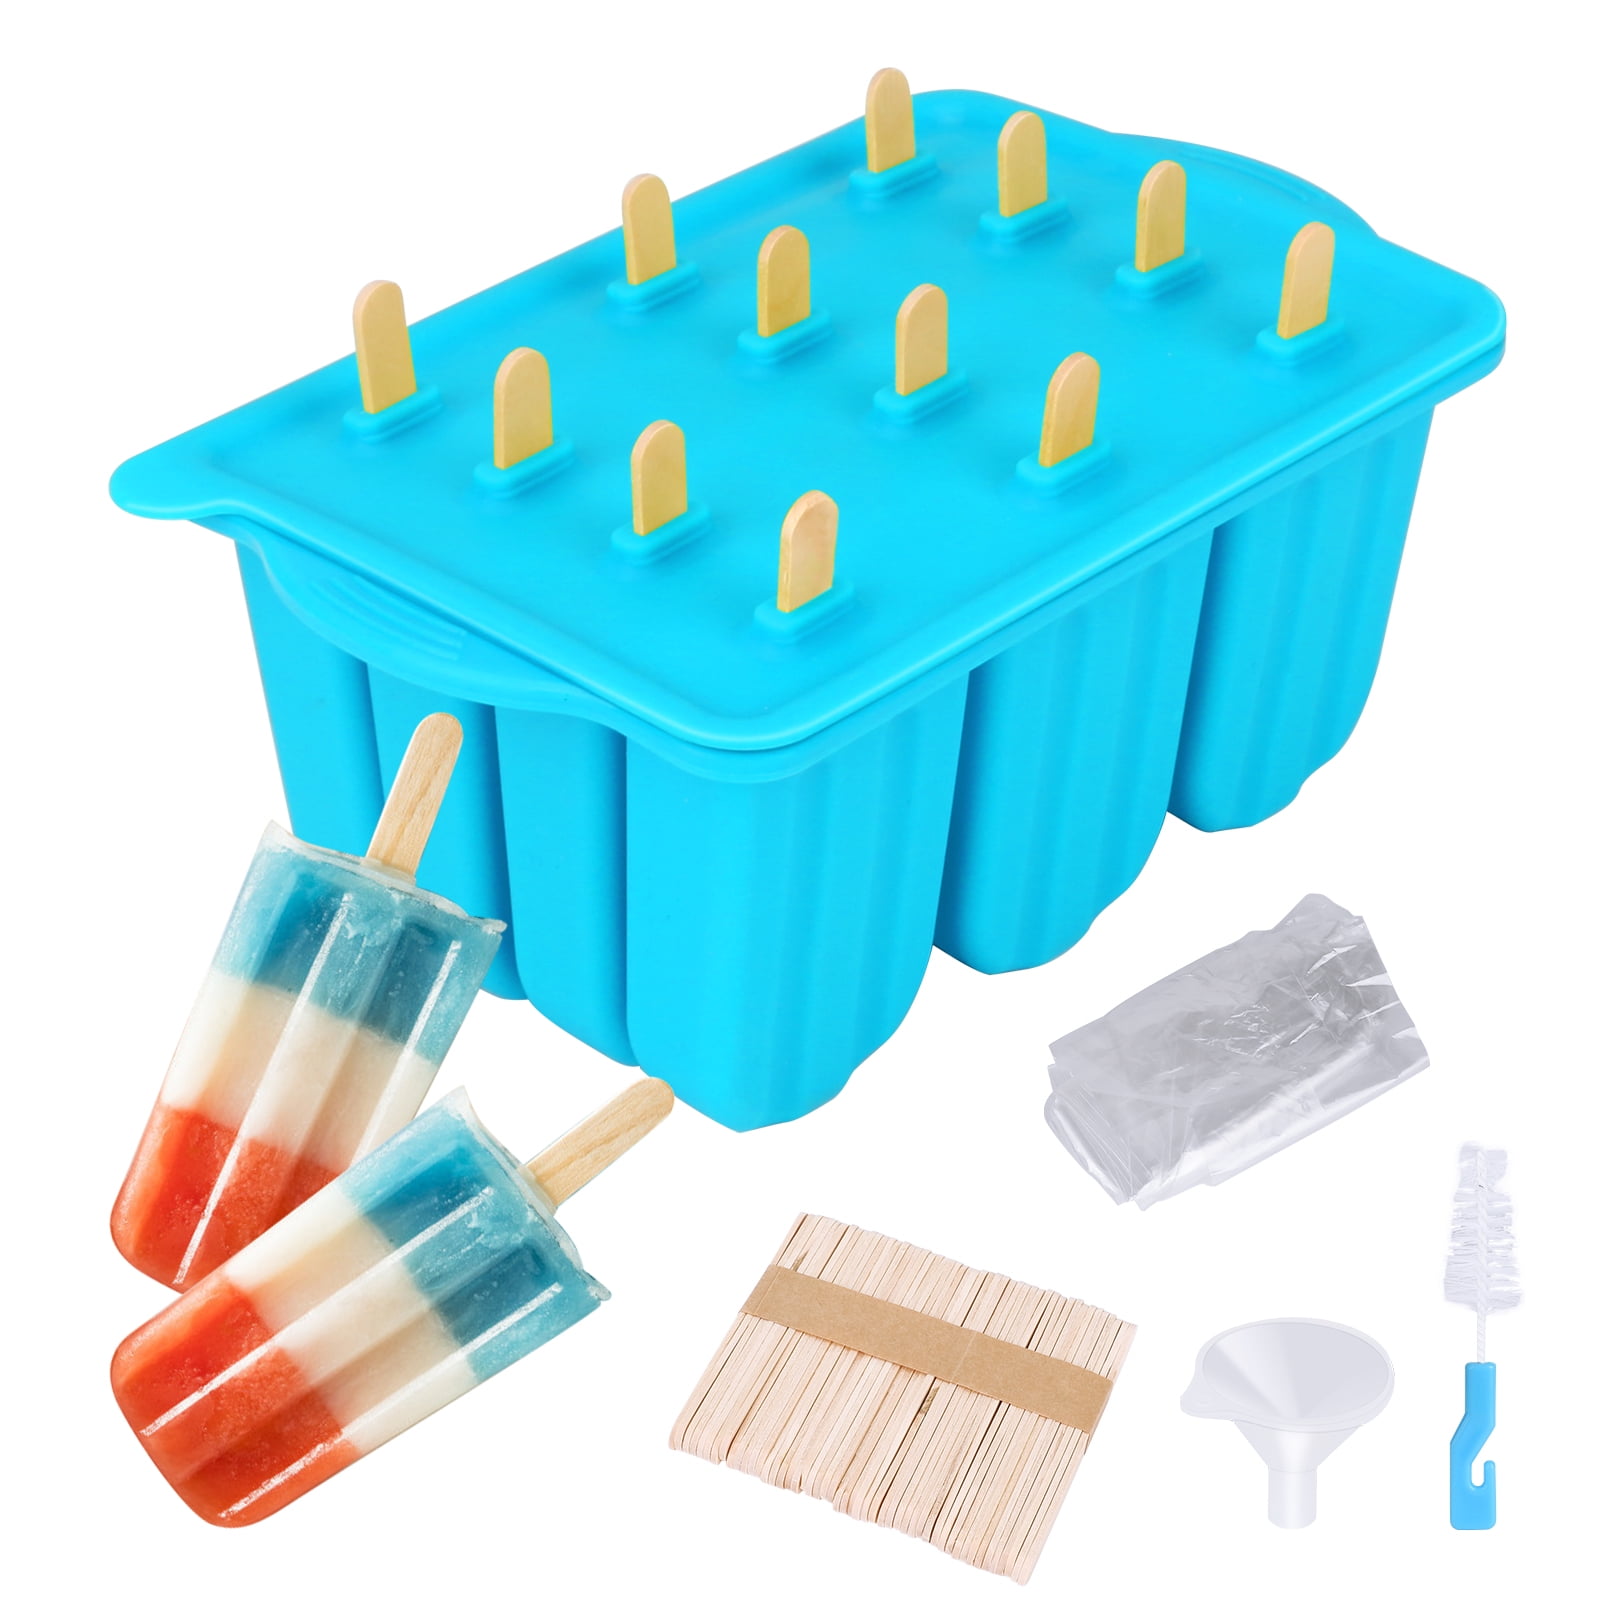 15 Best Popsicle Molds: Silicone, Plastic & More 2019